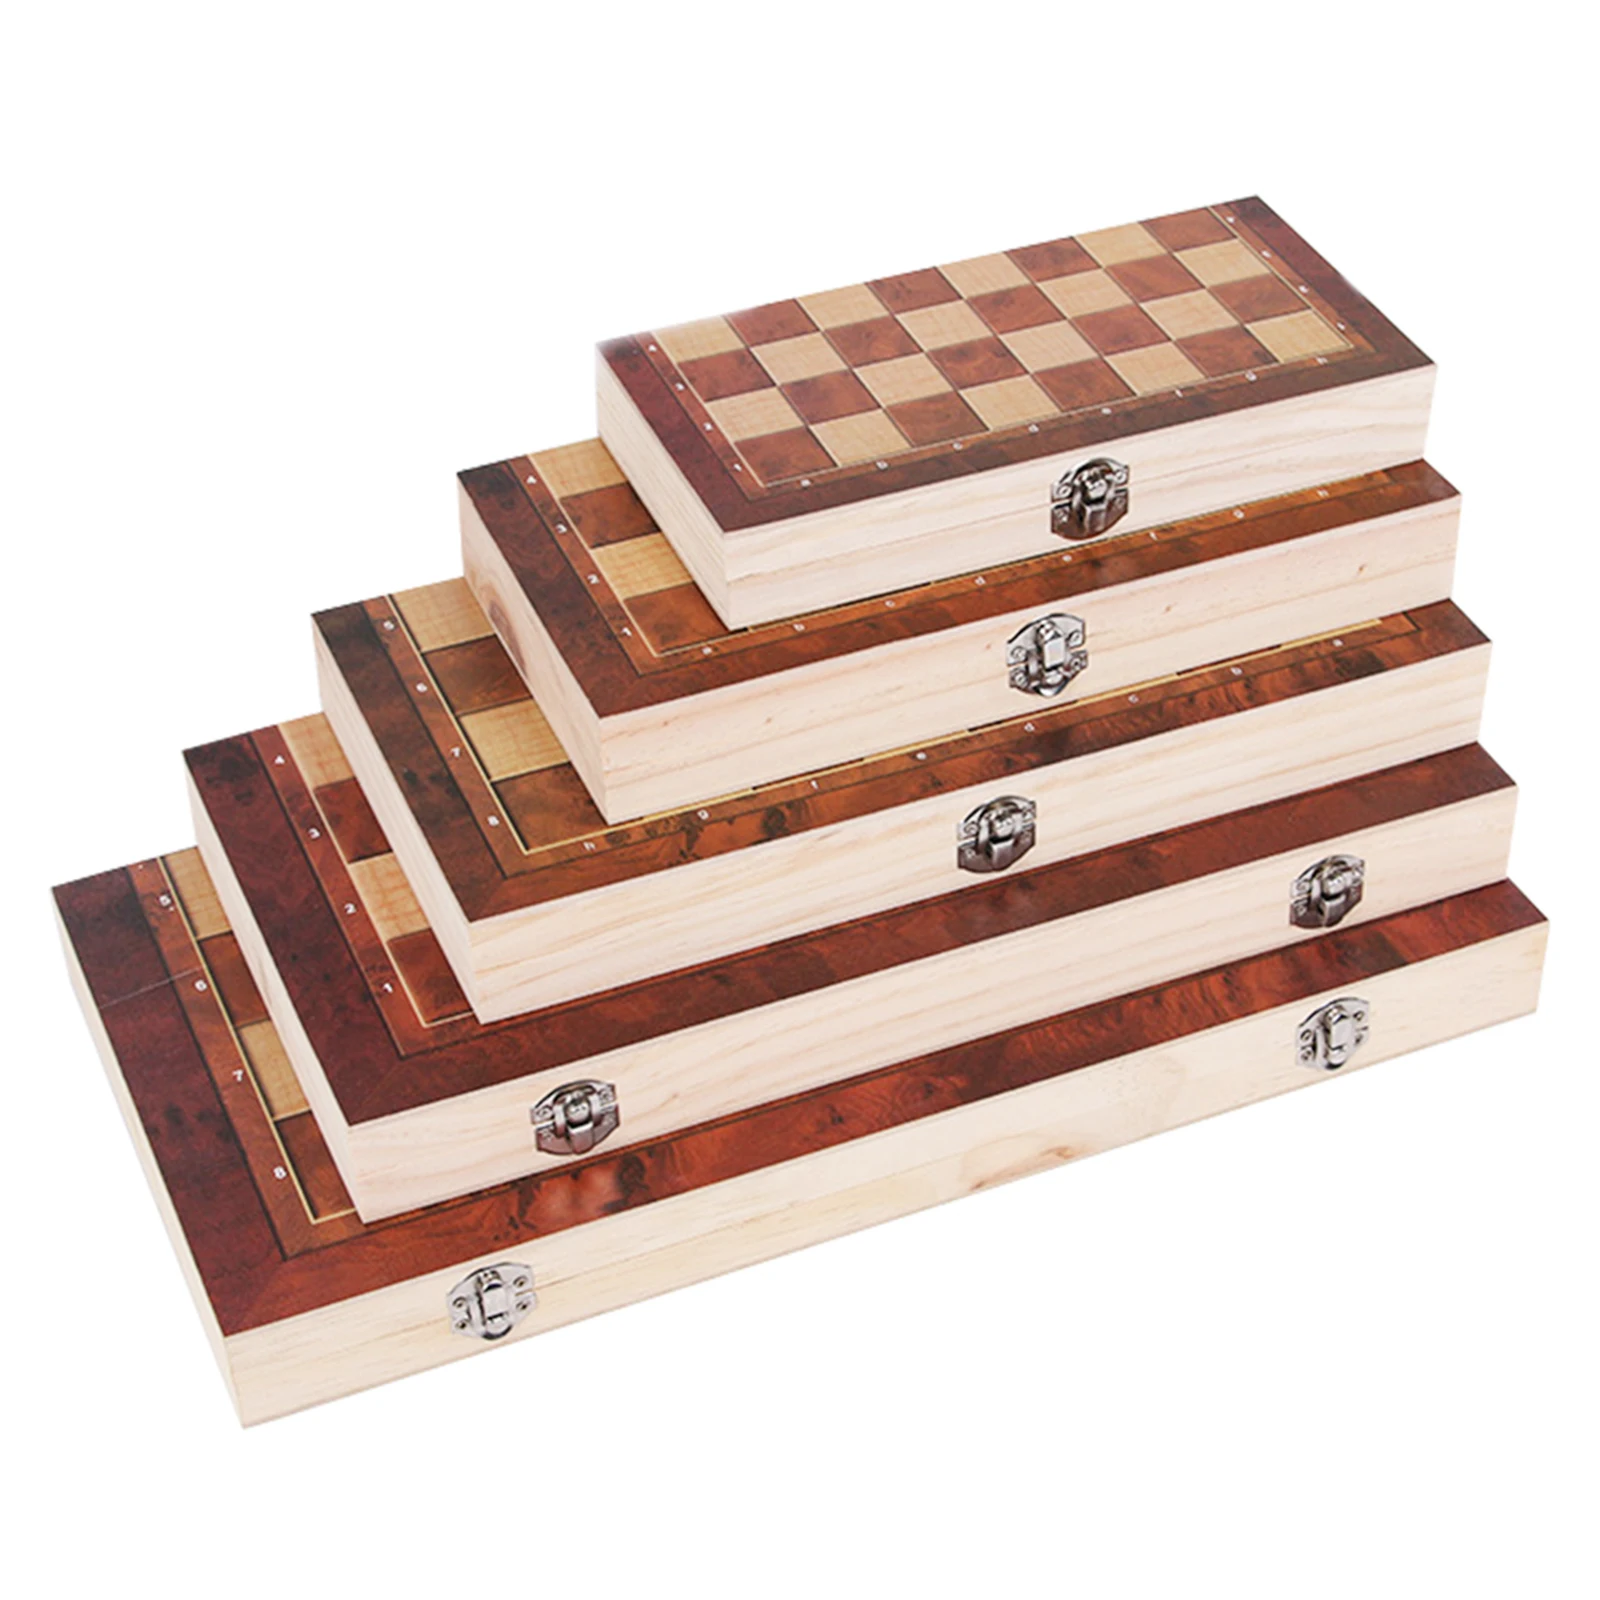 

3 IN 1 Wooden International Chess Set wooden Chess Board games Checkers Puzzle game engaged Birthday gift For kids Wood Toy